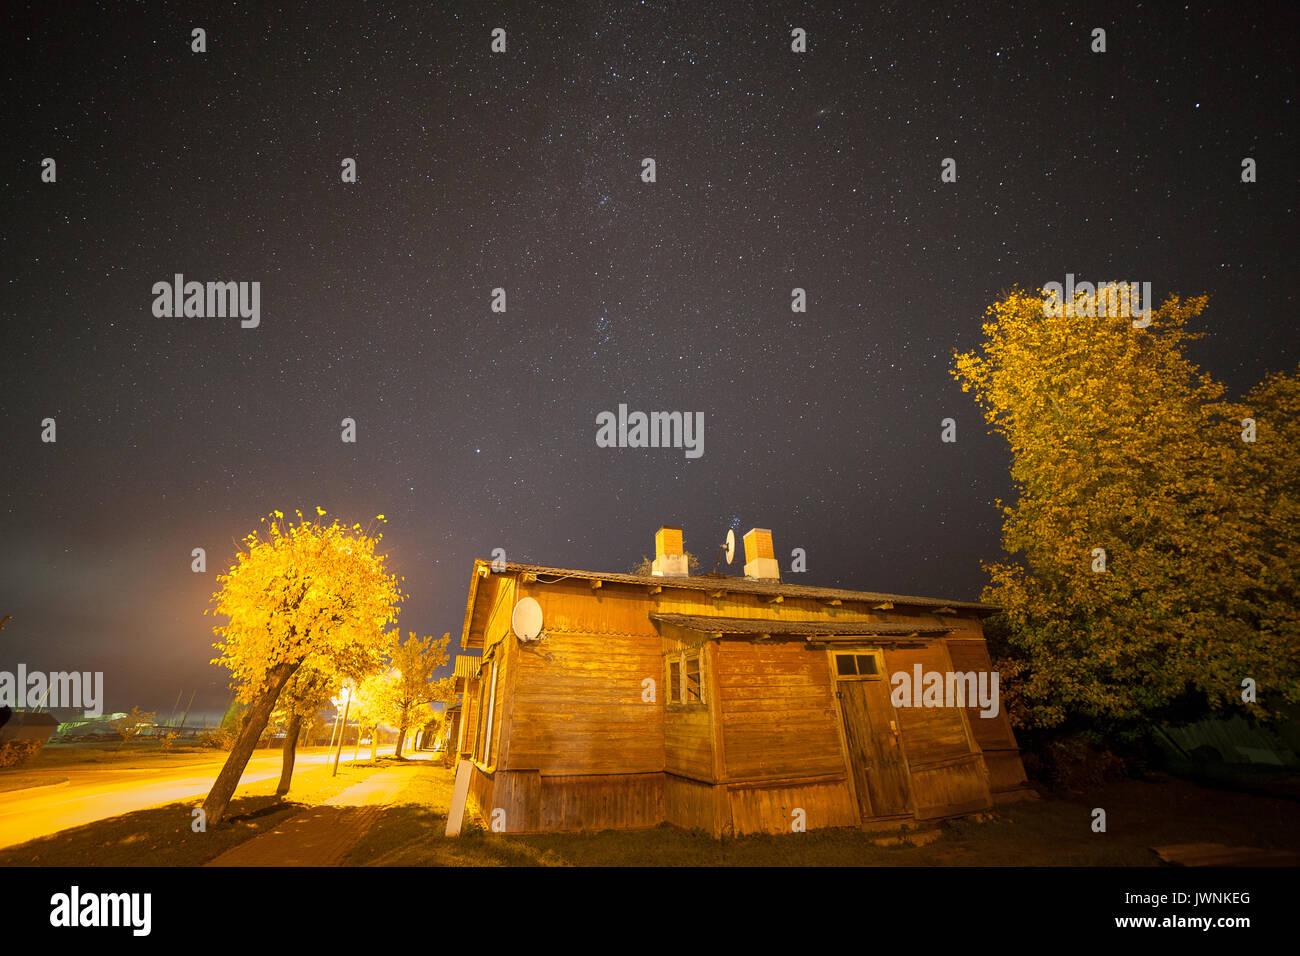 Starry sky over small town street with old wooden houses. Autumn time, Stock Photo